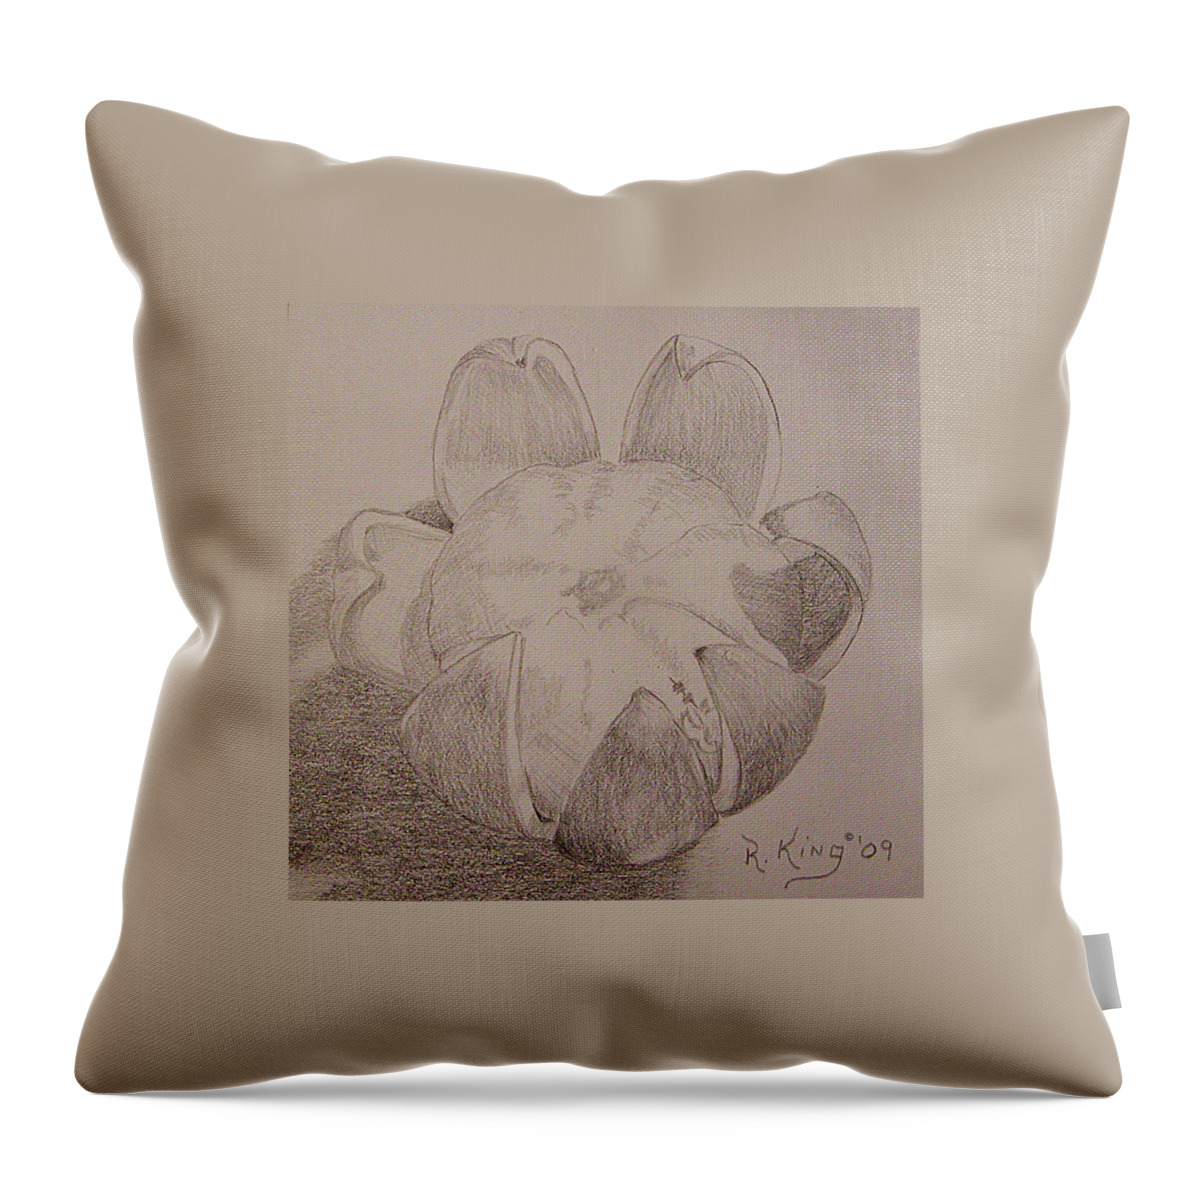 Roena King Throw Pillow featuring the drawing Peeled Orange by Roena King